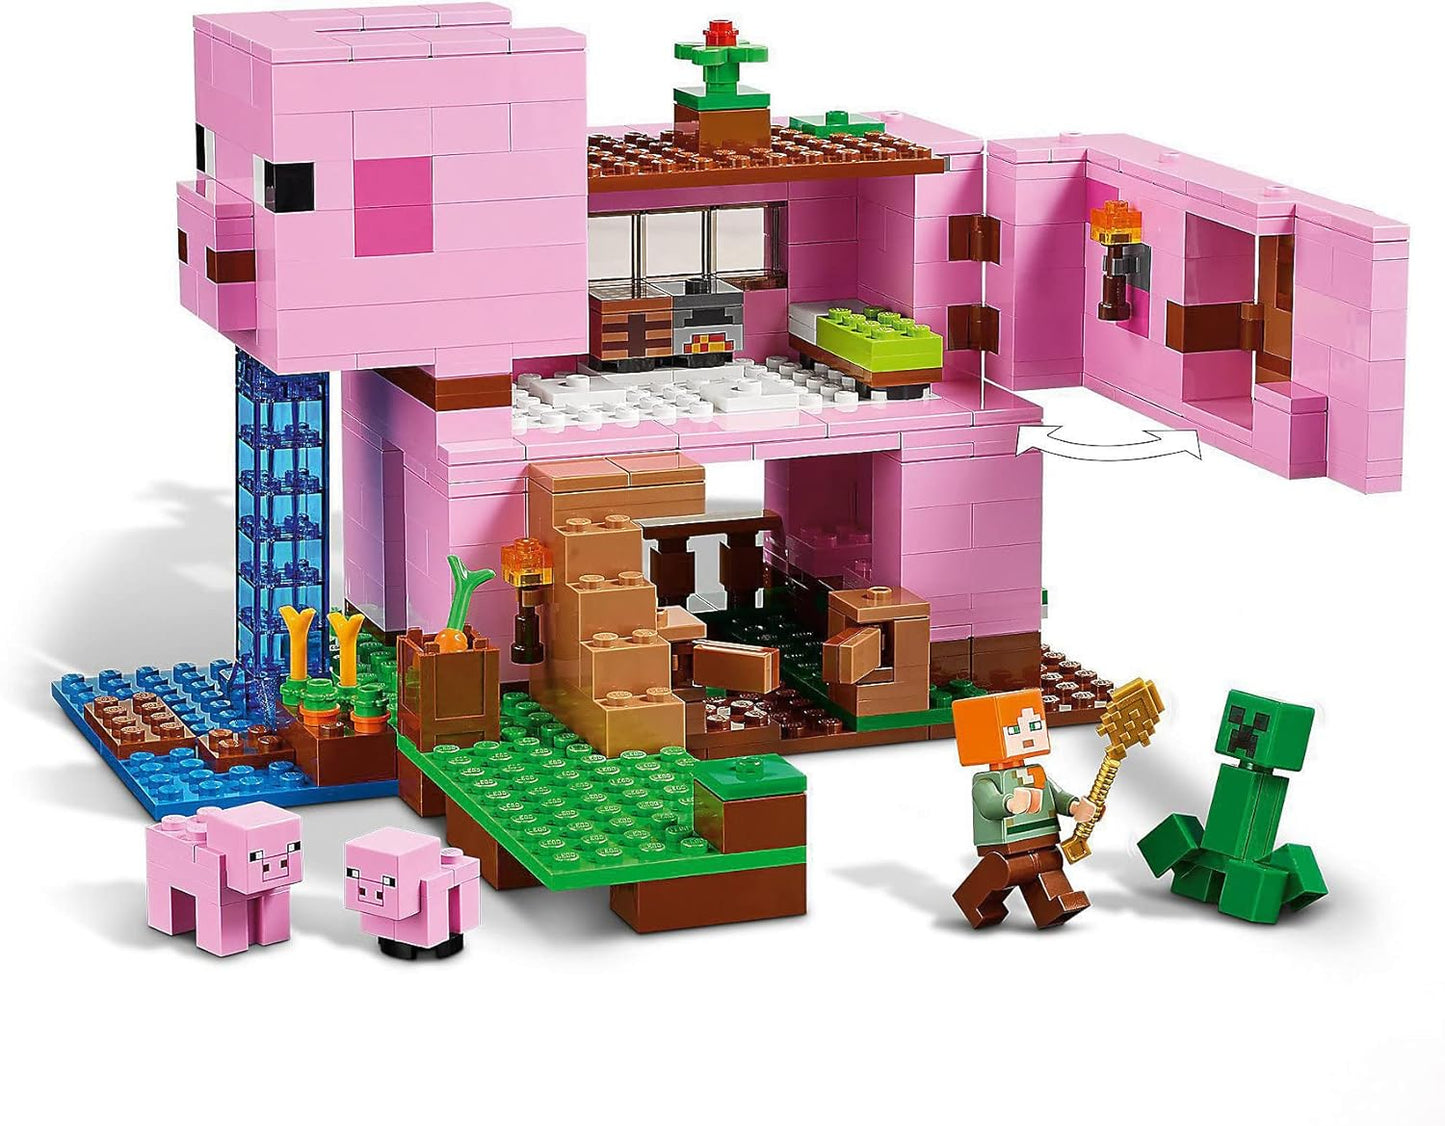 LEGO 21170 Minecraft The House-Pig Animal Building Toy with Accessories, Gifts for Boys and Girls Ages 8 and Up for Birthday Parties, Alex and Creeper Figures